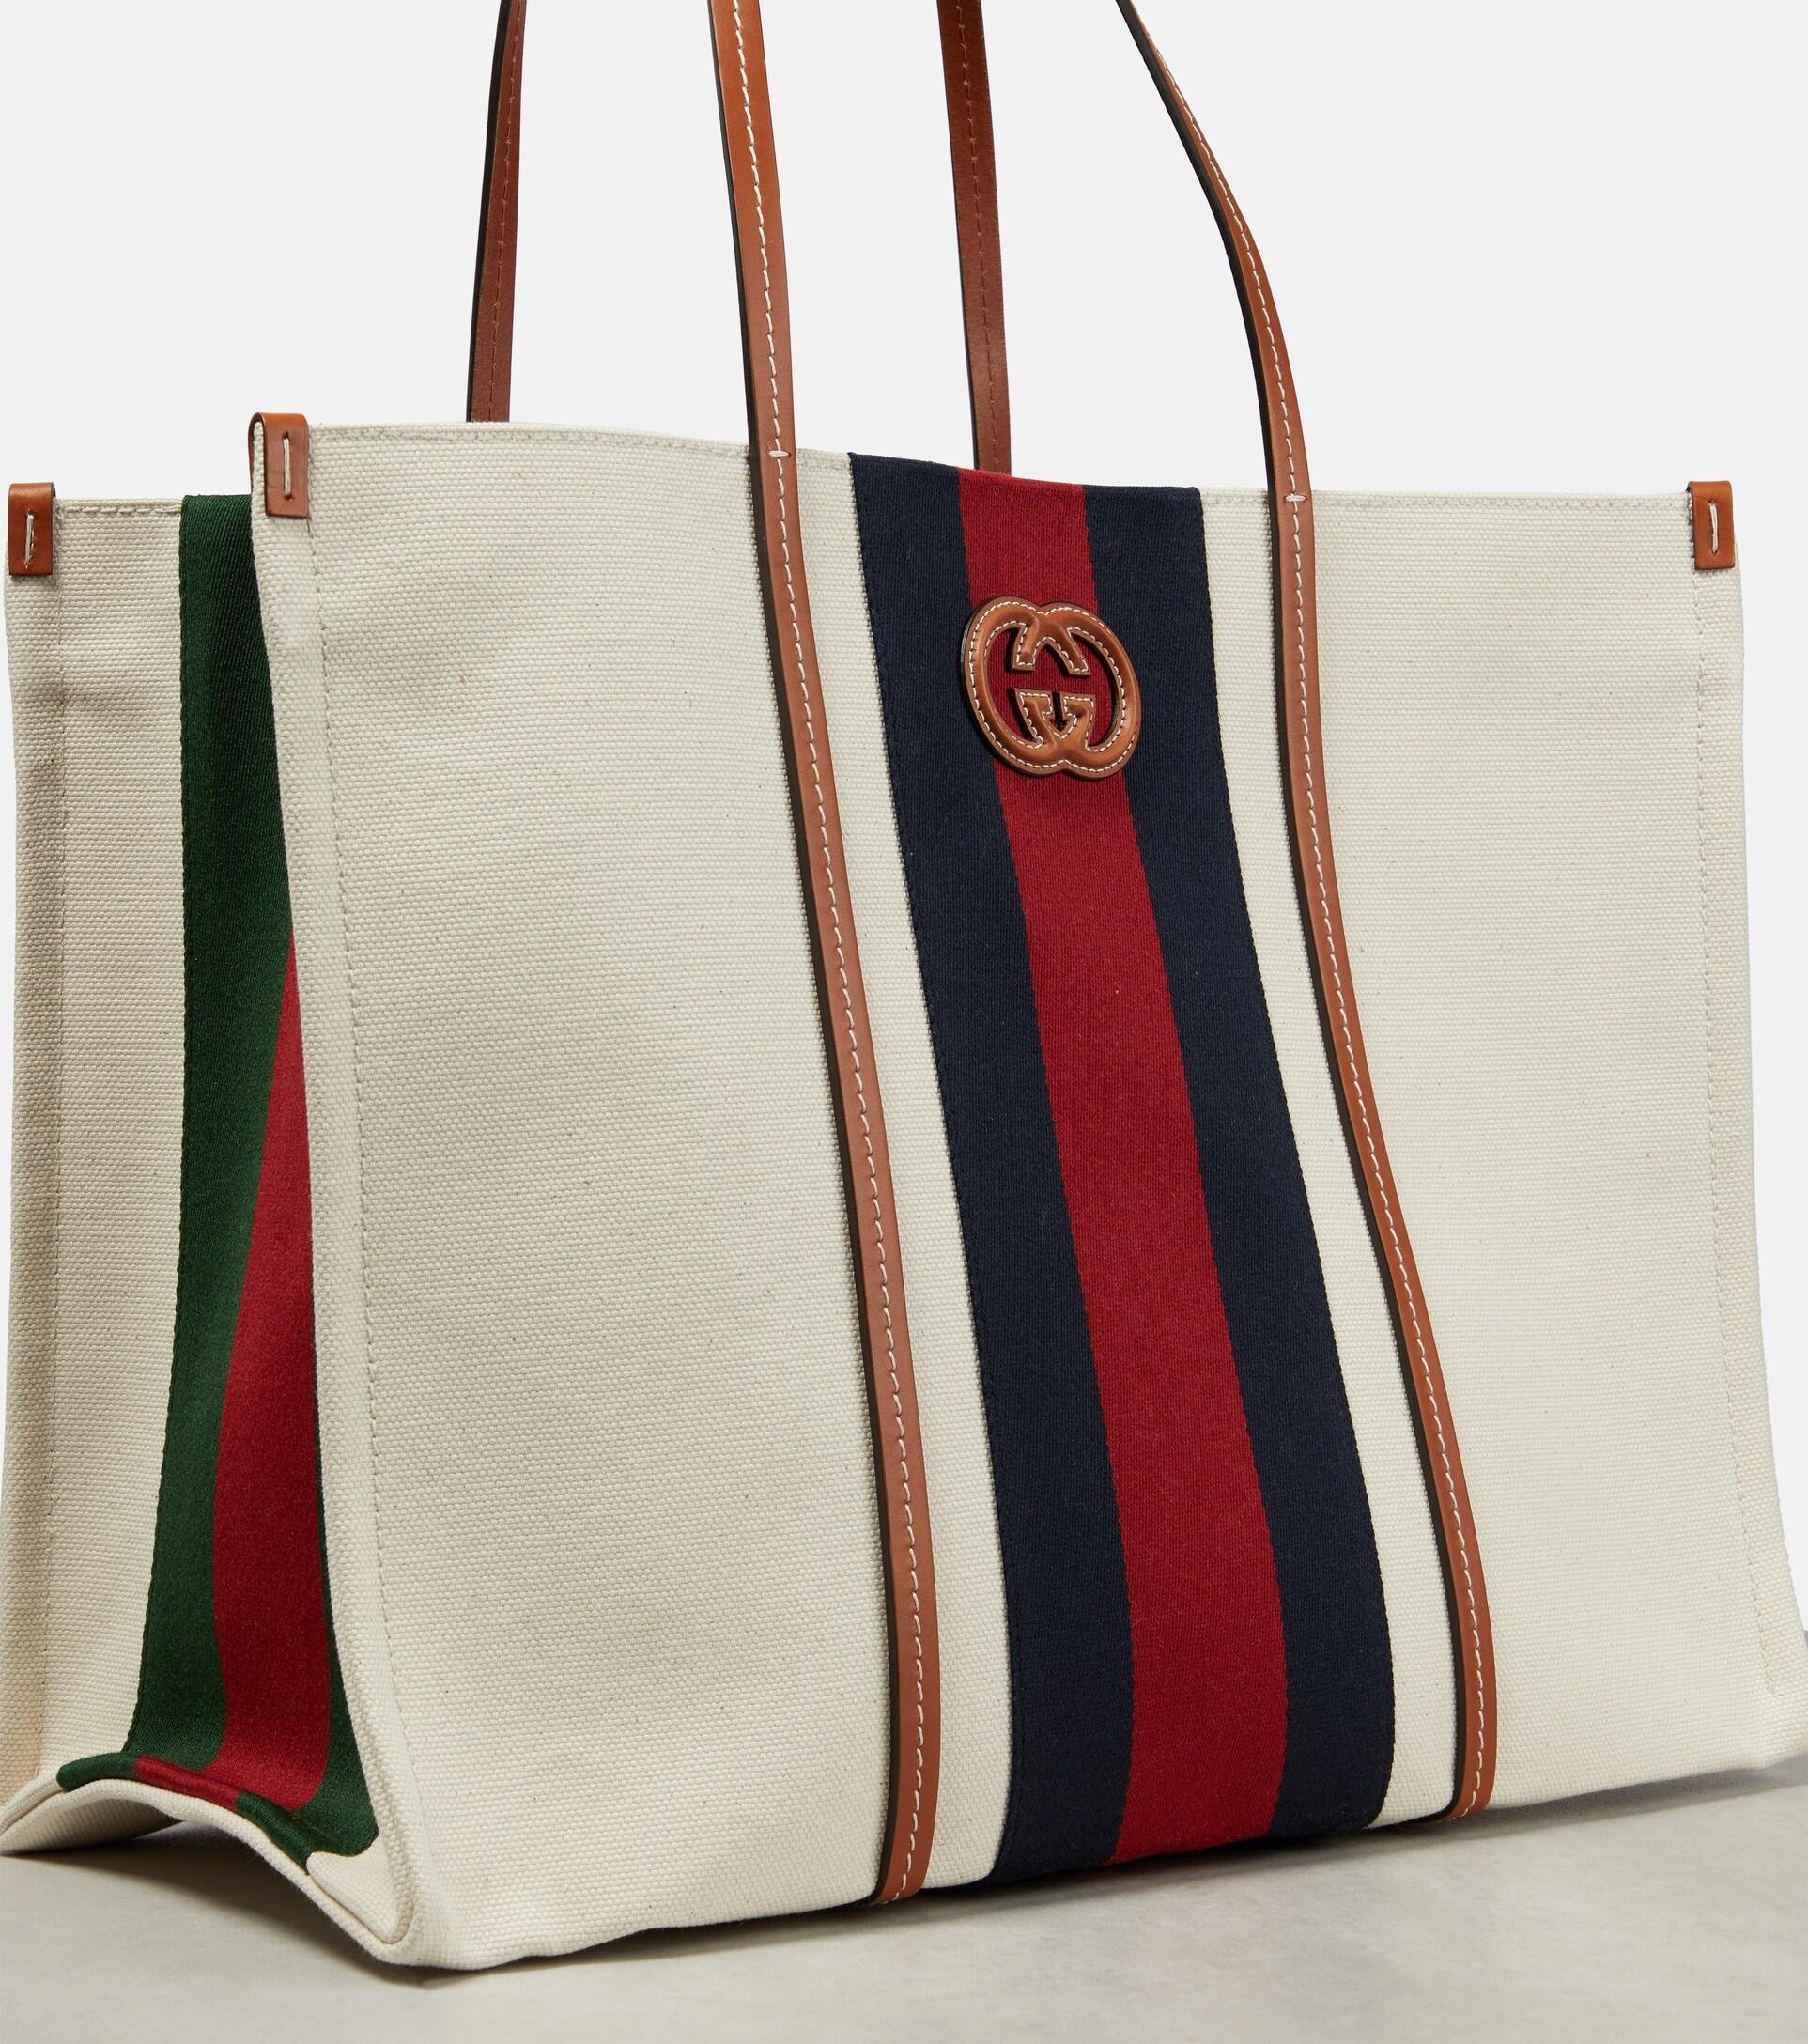 Tote bag with Round Interlocking G in Neutral Fabric